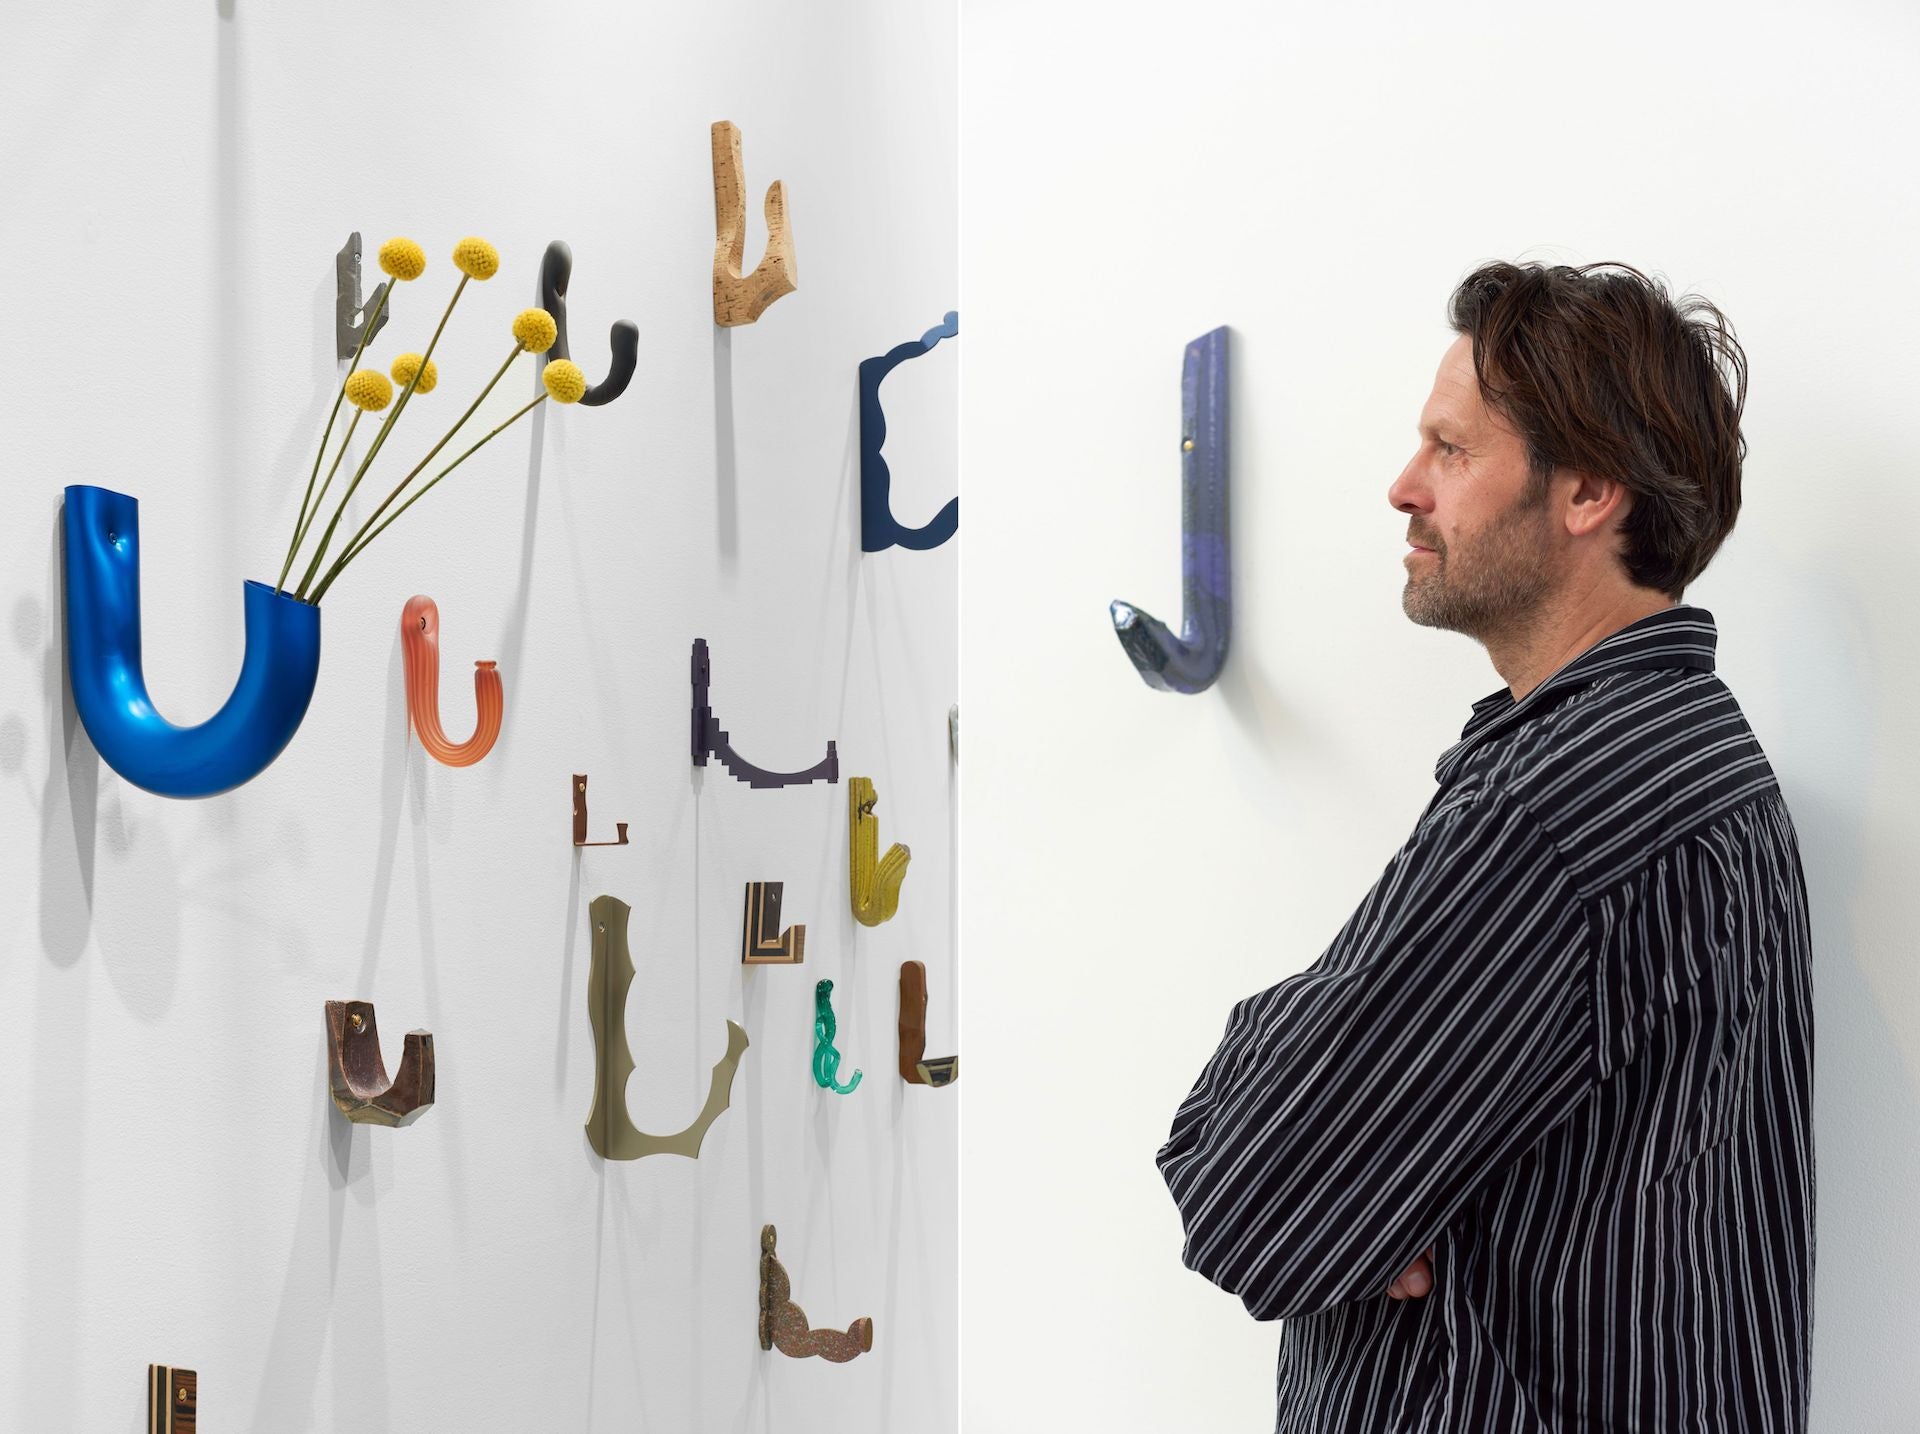 Installation view of Martino Gamper: I Am Many Moods at Anton Kern Gallery in New York, 2023. Portrait of designer Martino Gamper. © Martino Gamper. Photos © Izzy Leung; courtesy of the artist and Anton Kern Gallery, New York